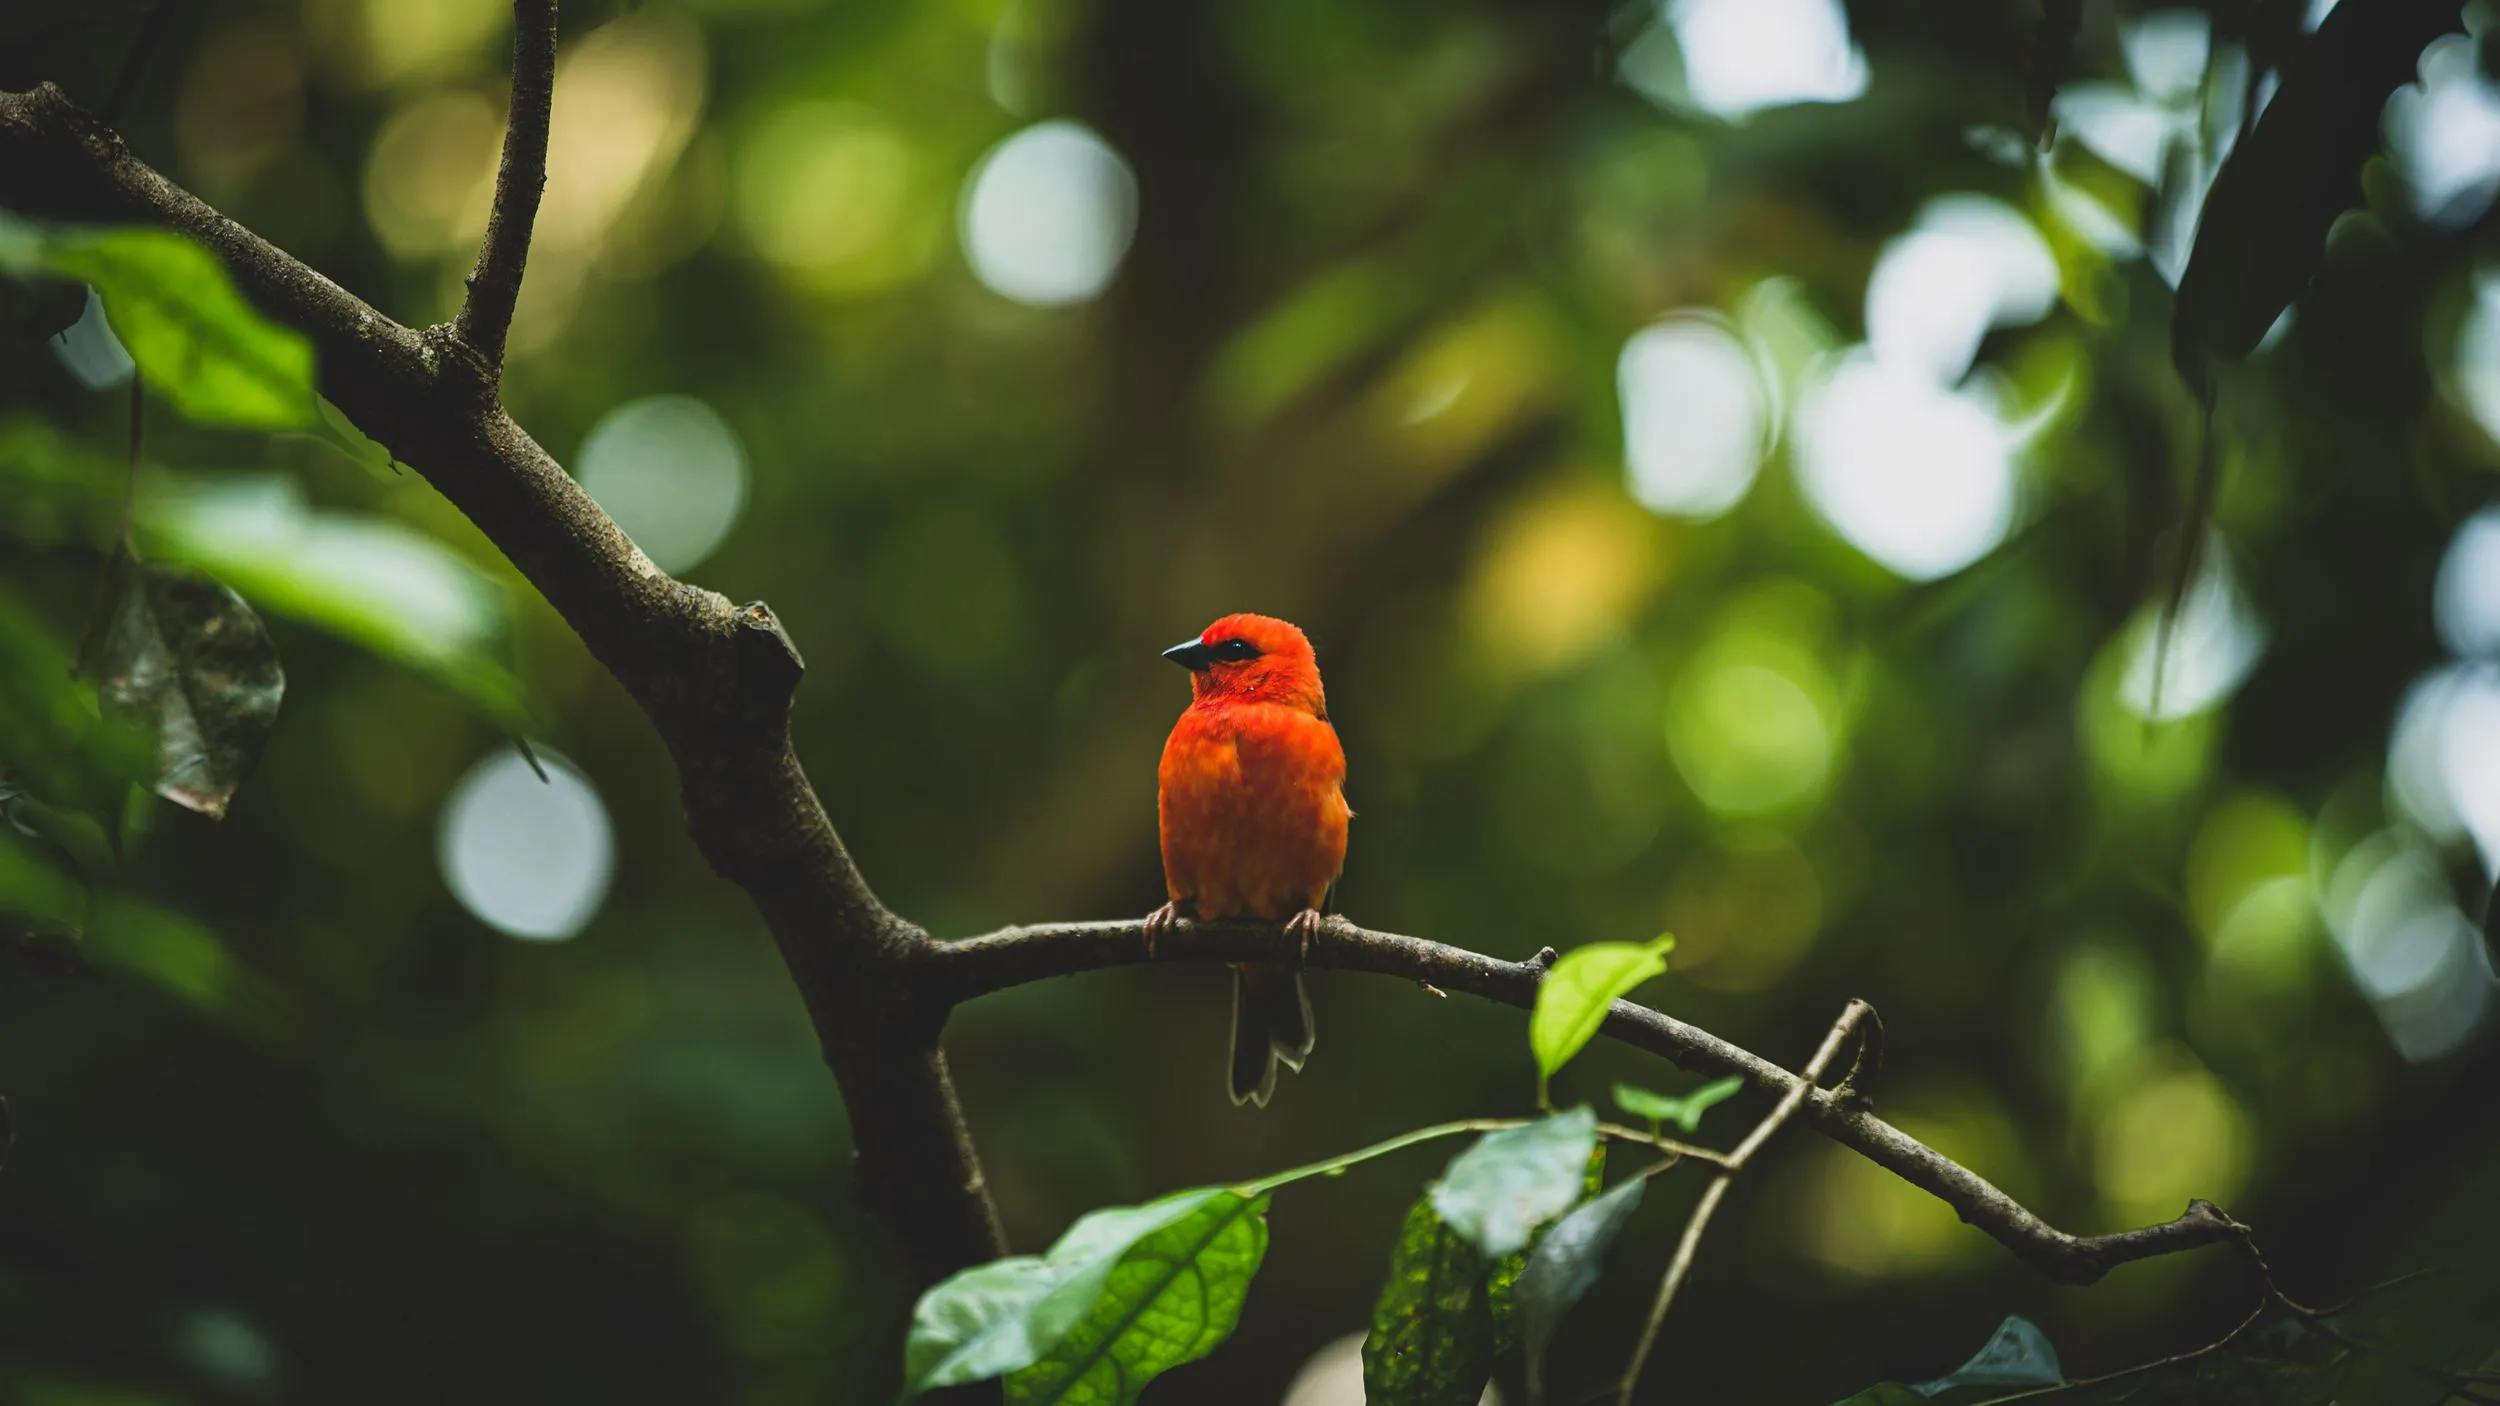 A small red bird in a tree